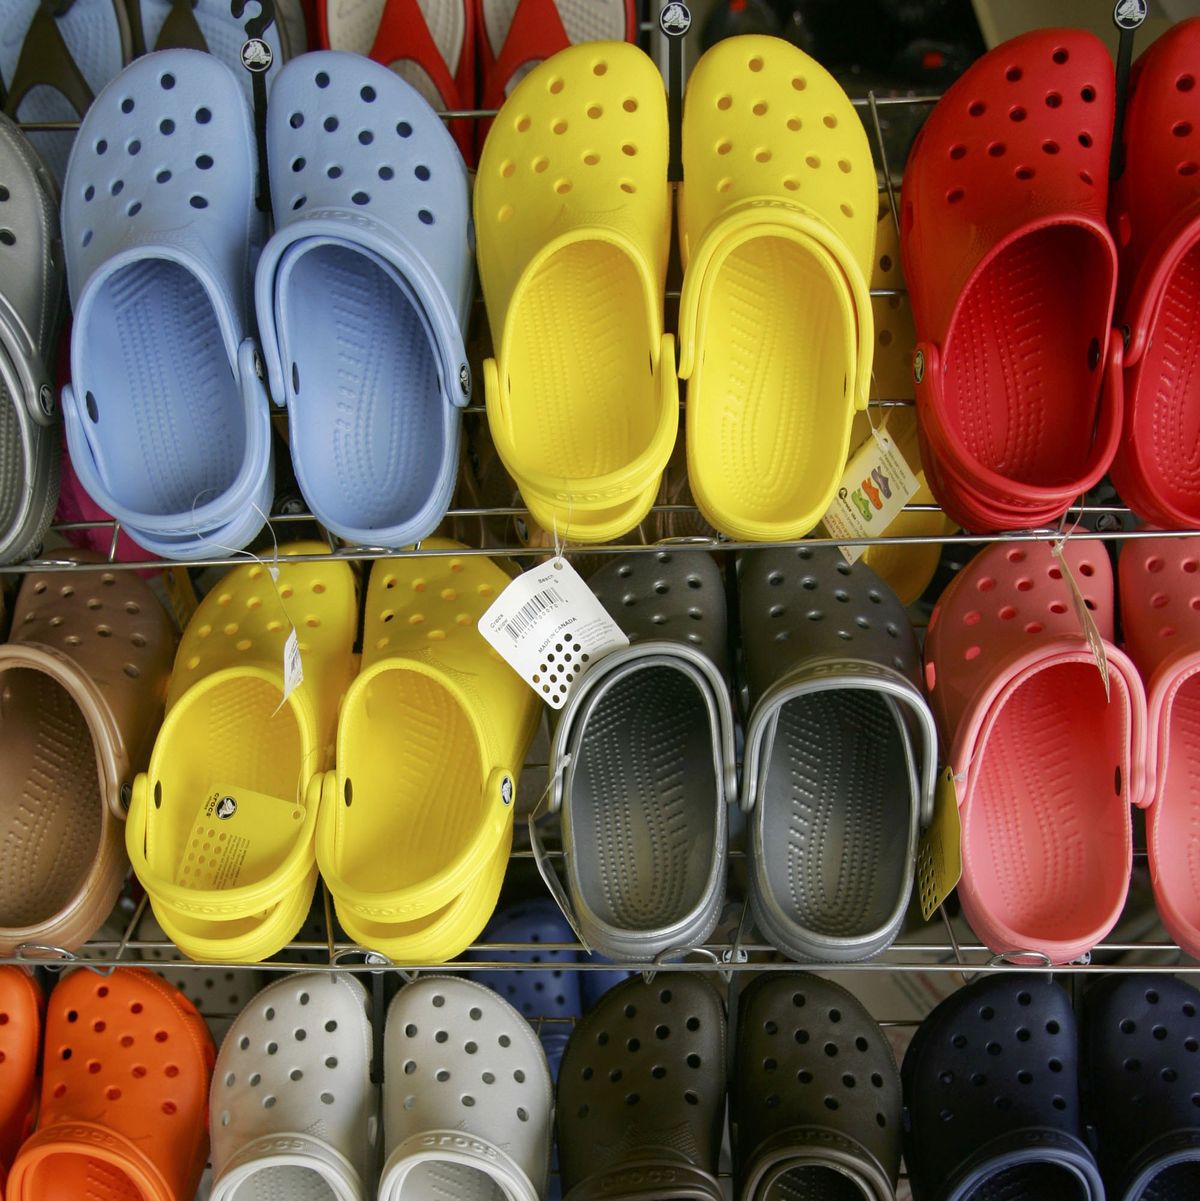 Banke granske narre Crocs Are Officially 20 Years Old. Here's Why Now's the Time to Buy a Pair